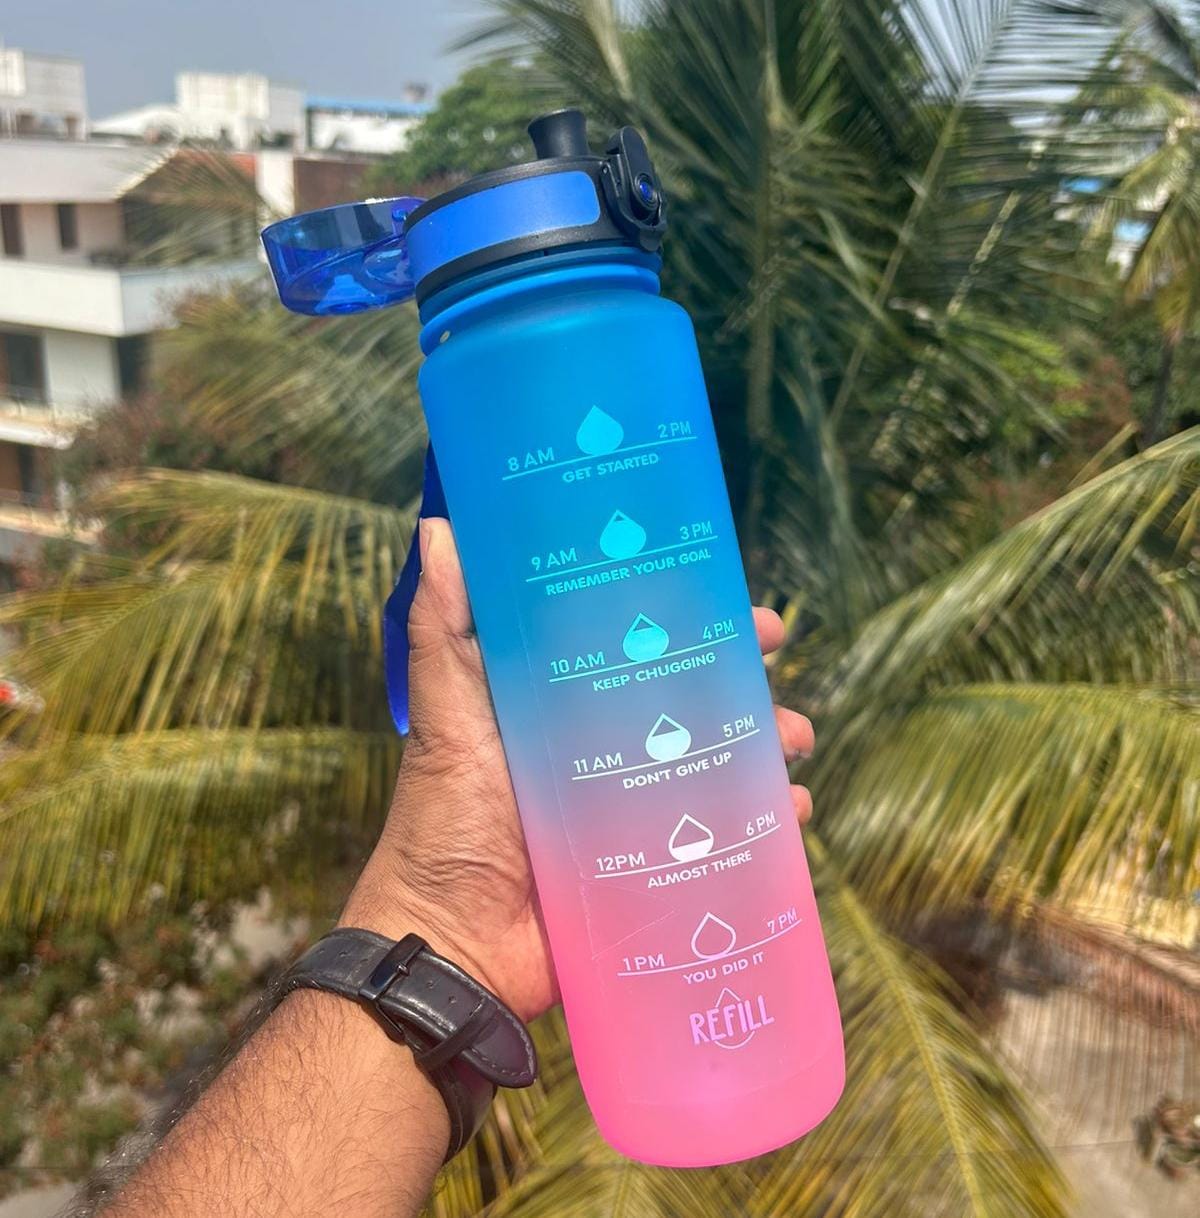 The polymer plastic water bottle is a reliable and lightweight hydration companion designed for everyday use. Made from durable polymer plastic, this water bottle offers a practical and cost-effective solution for staying hydrated on the go.